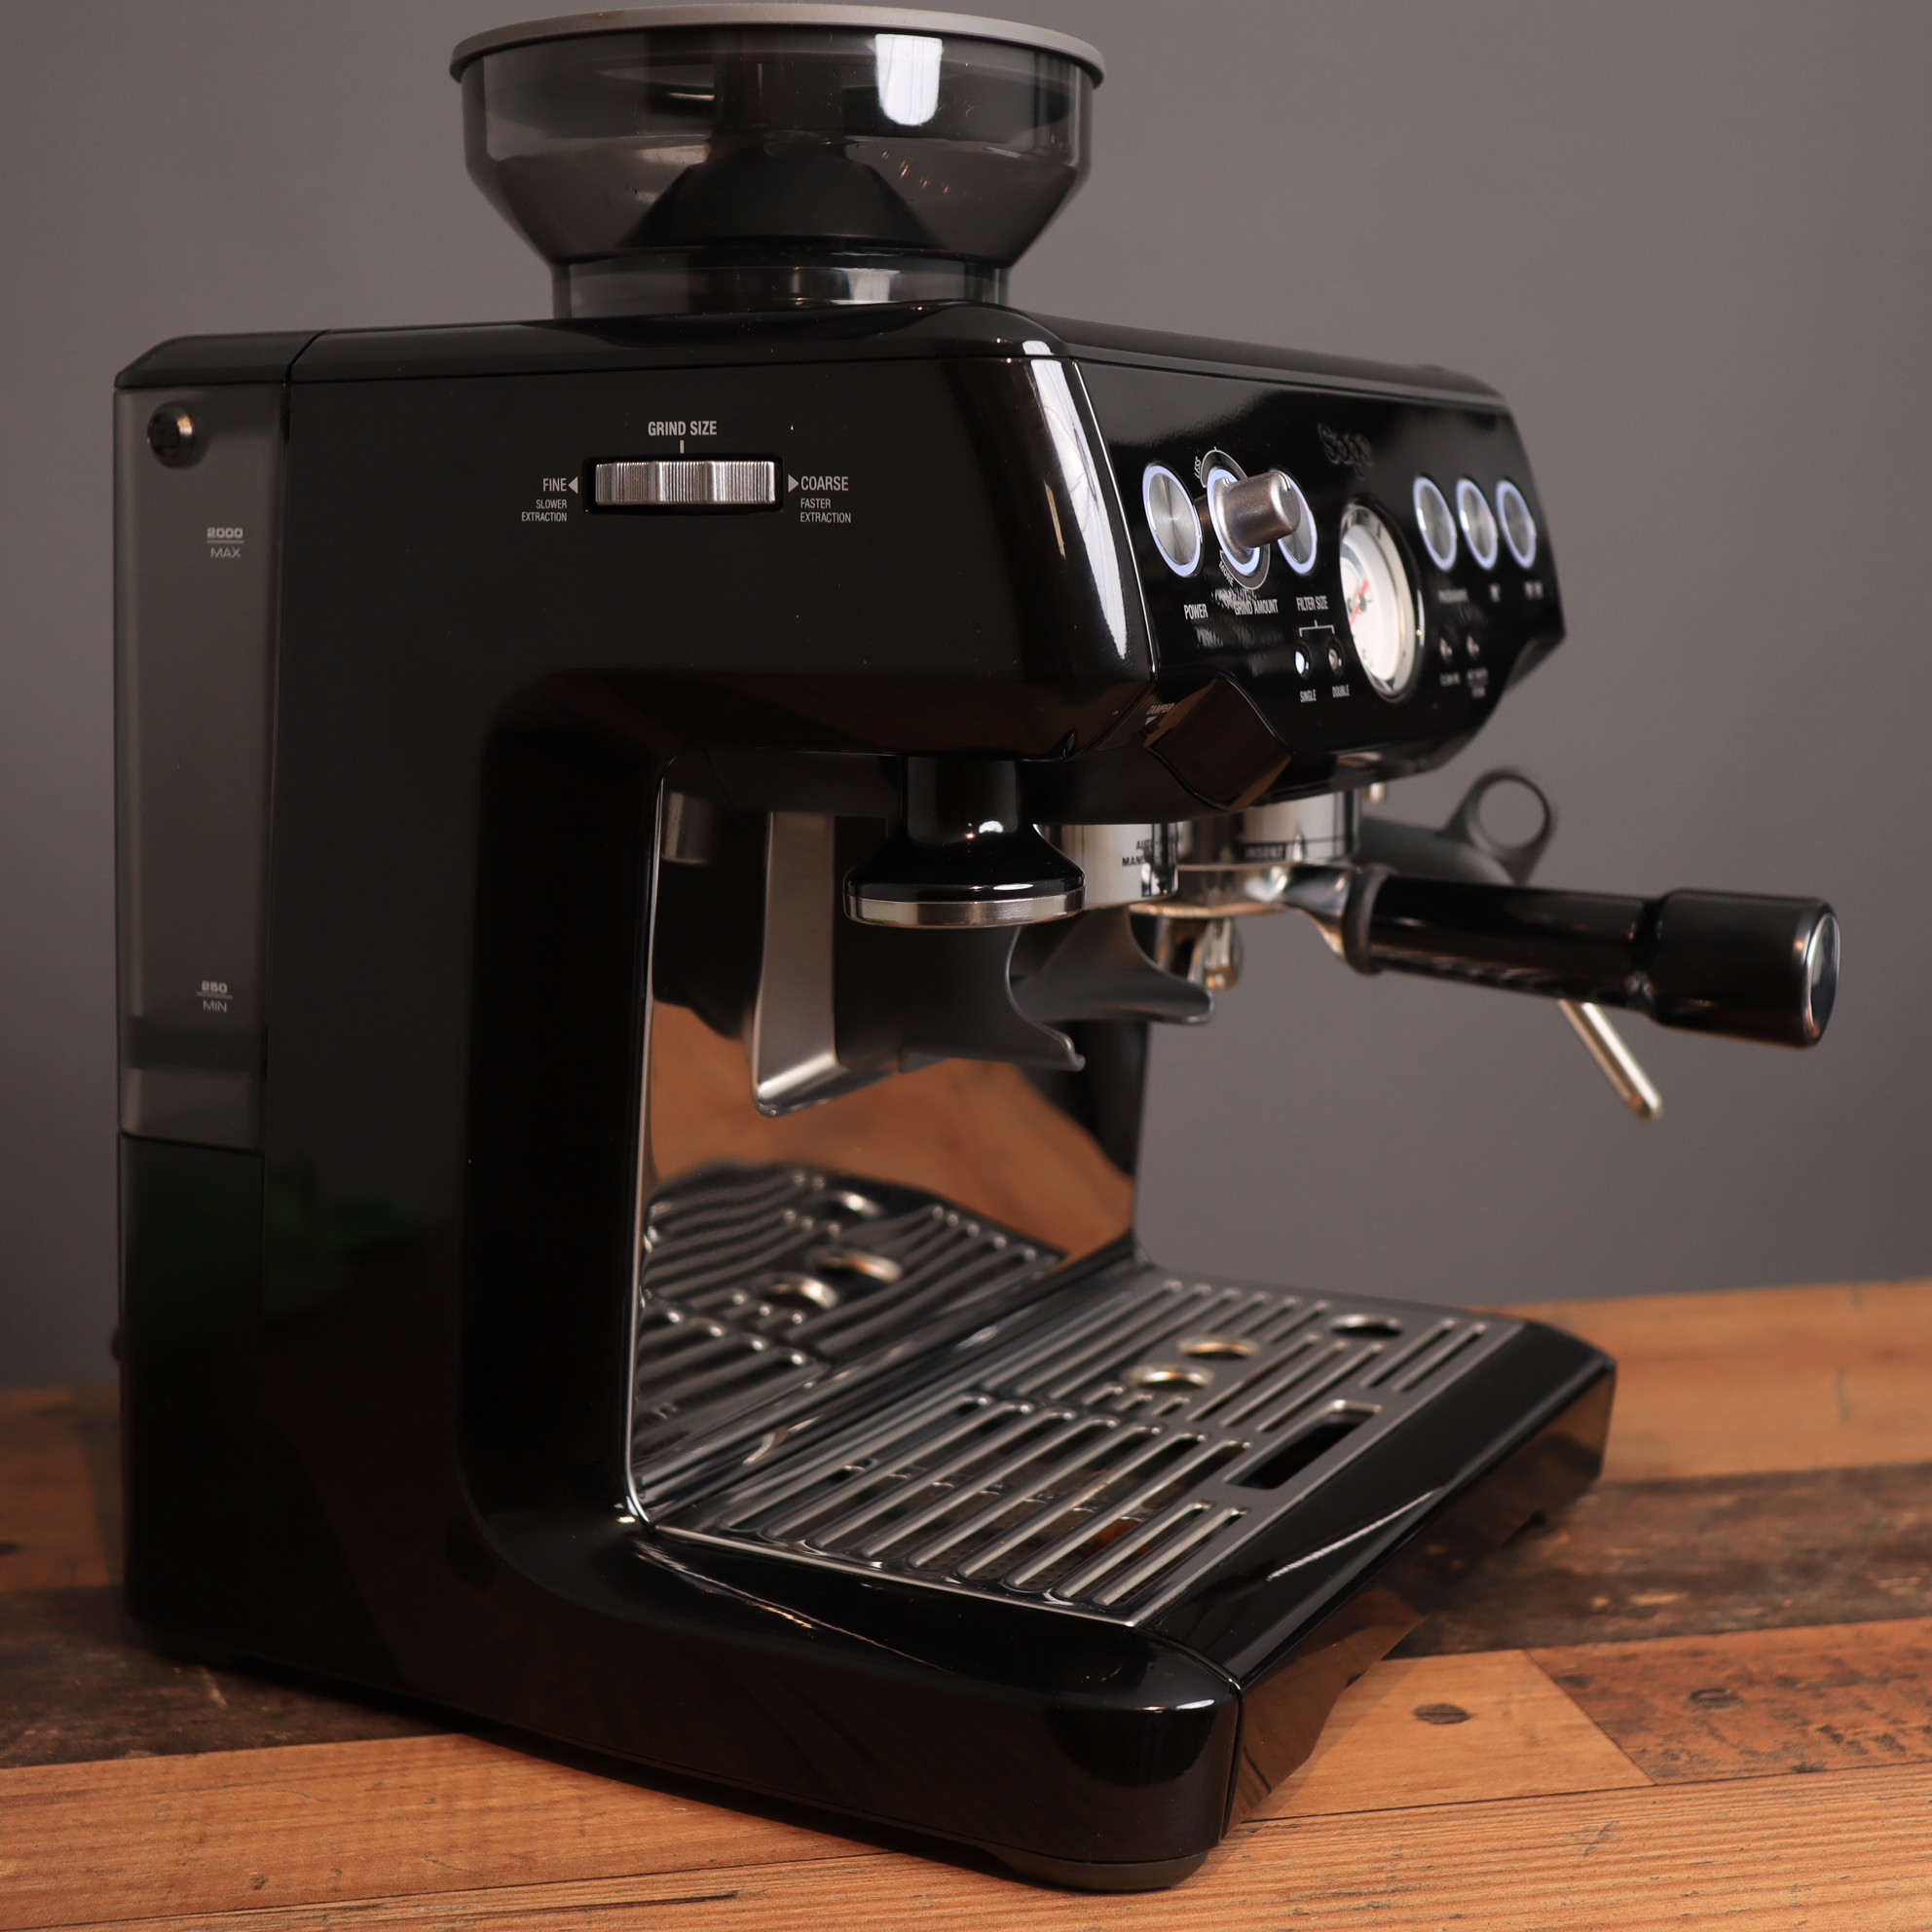 Breville Barista Express from the left side